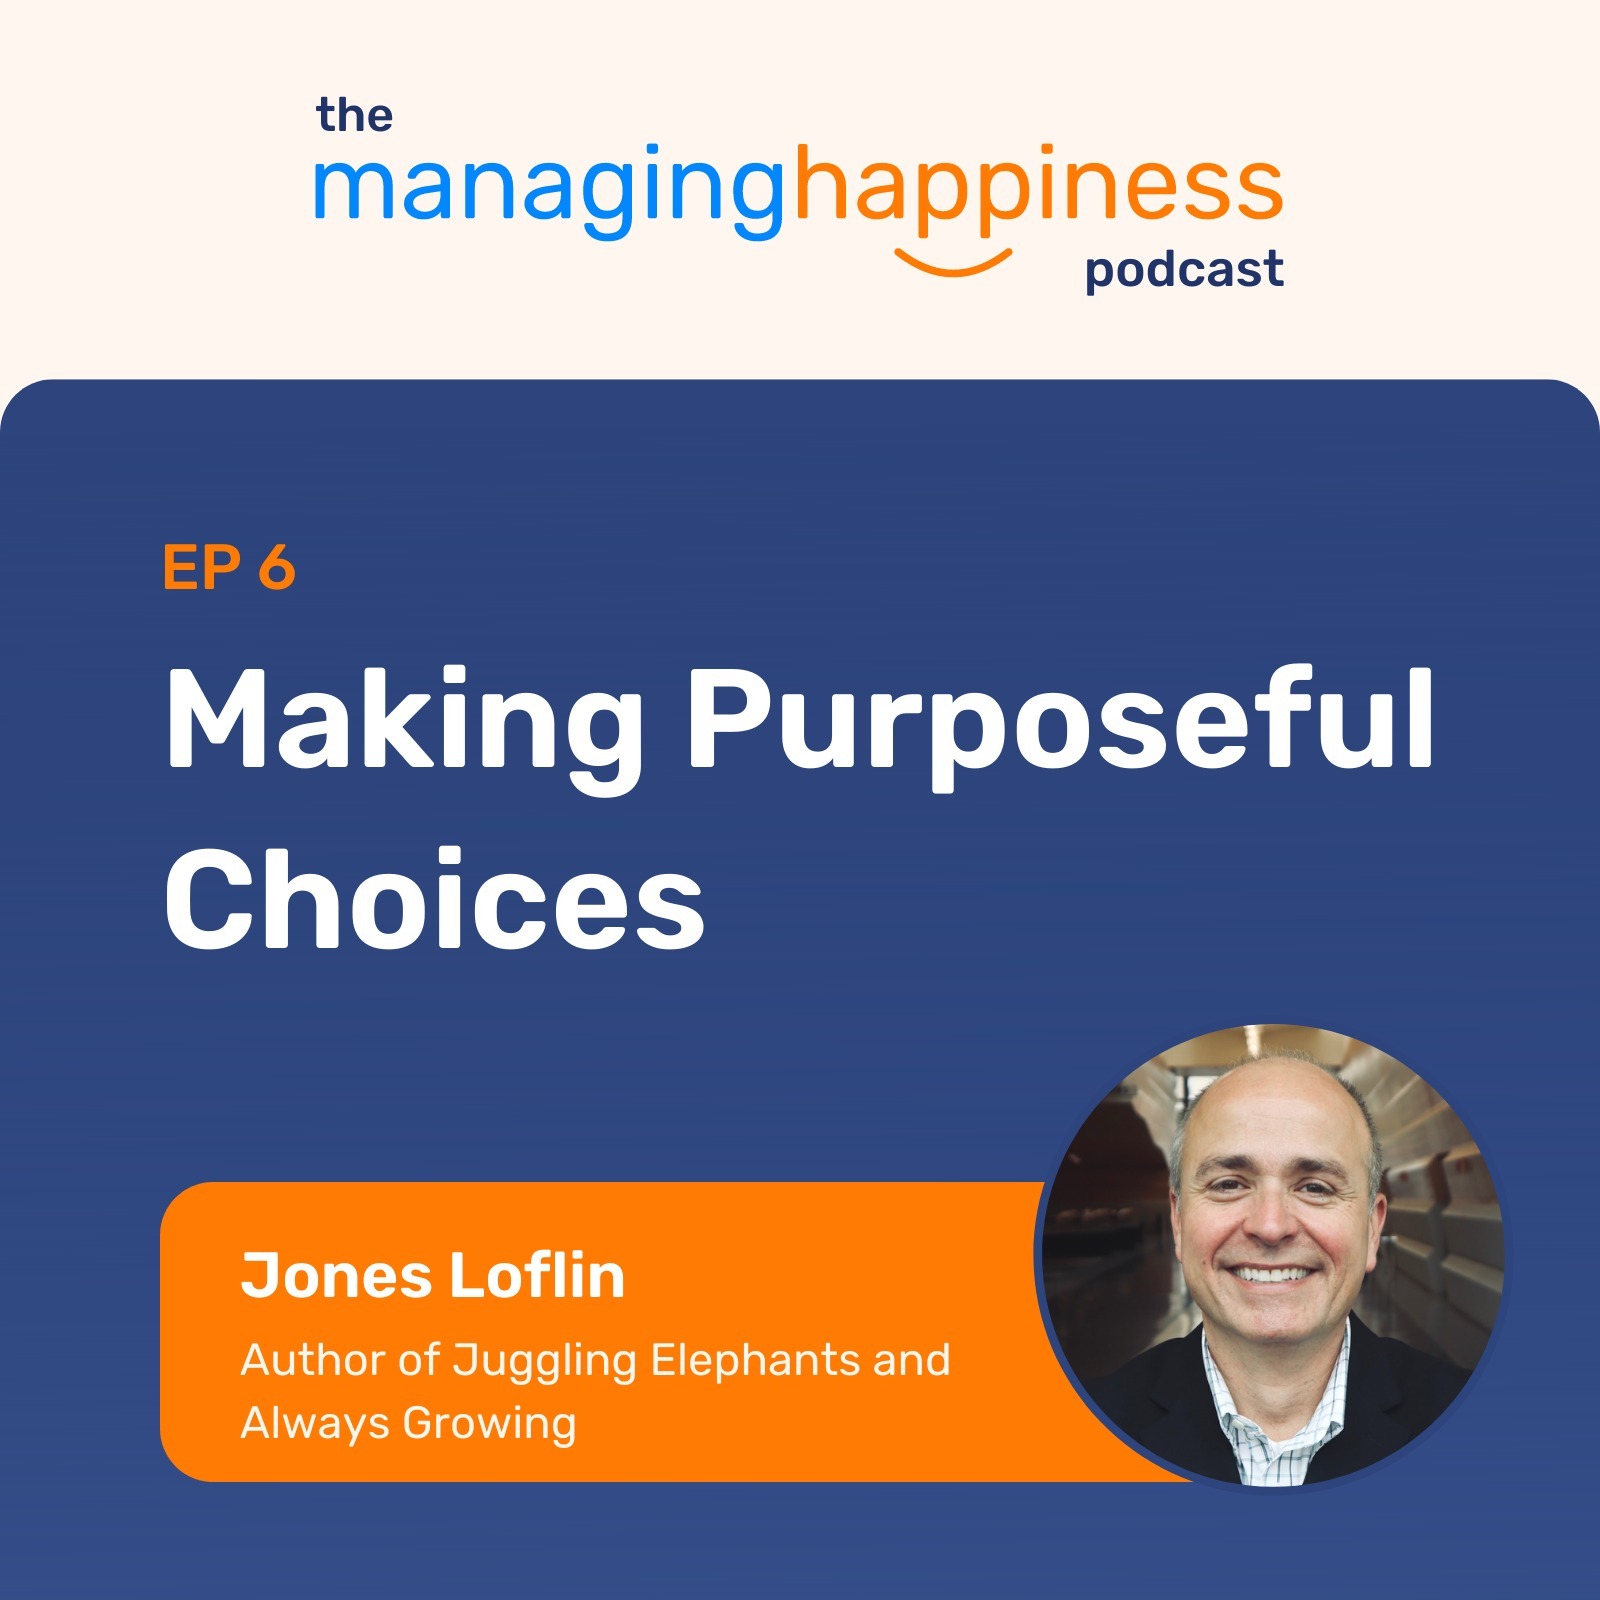 The Managing Happiness podcast episode with Jones Loflin